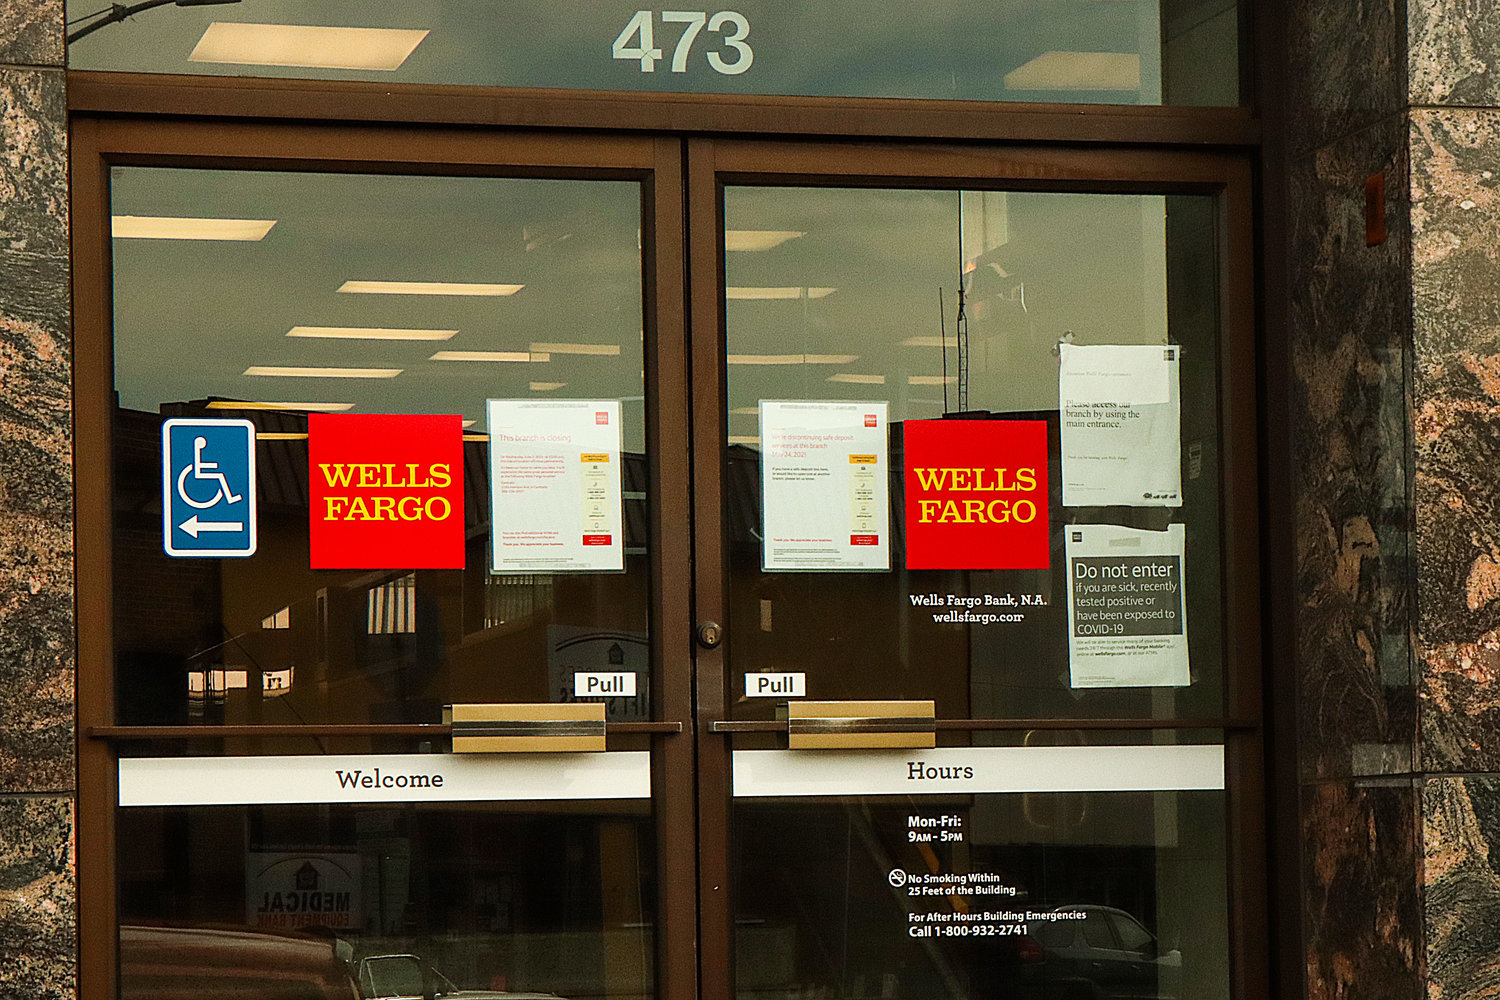 Signs on the Wells Fargo located at 473 North Market Boulevard indicate the branch is closing.